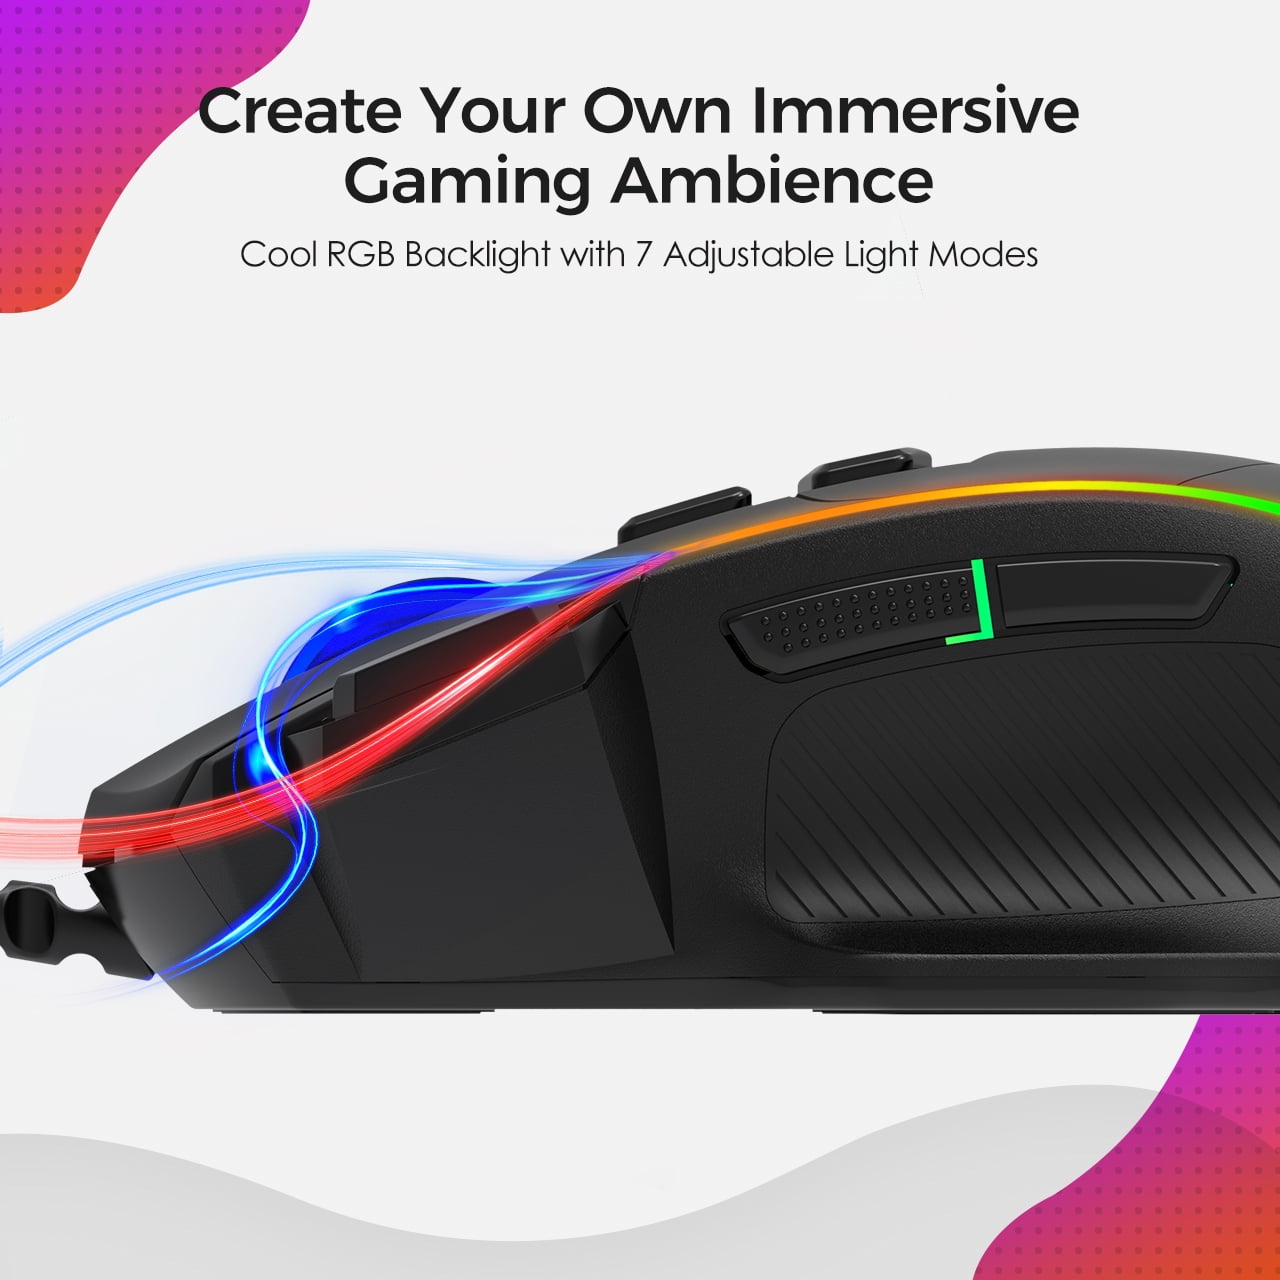 USB Wired Programmable Gaming Mouse 3200DPI Adjustable Backlight 8 Custom  Buttons Mechanical Gaming Mice For Gaming Laptop Computer Pro Gamer/ LOL